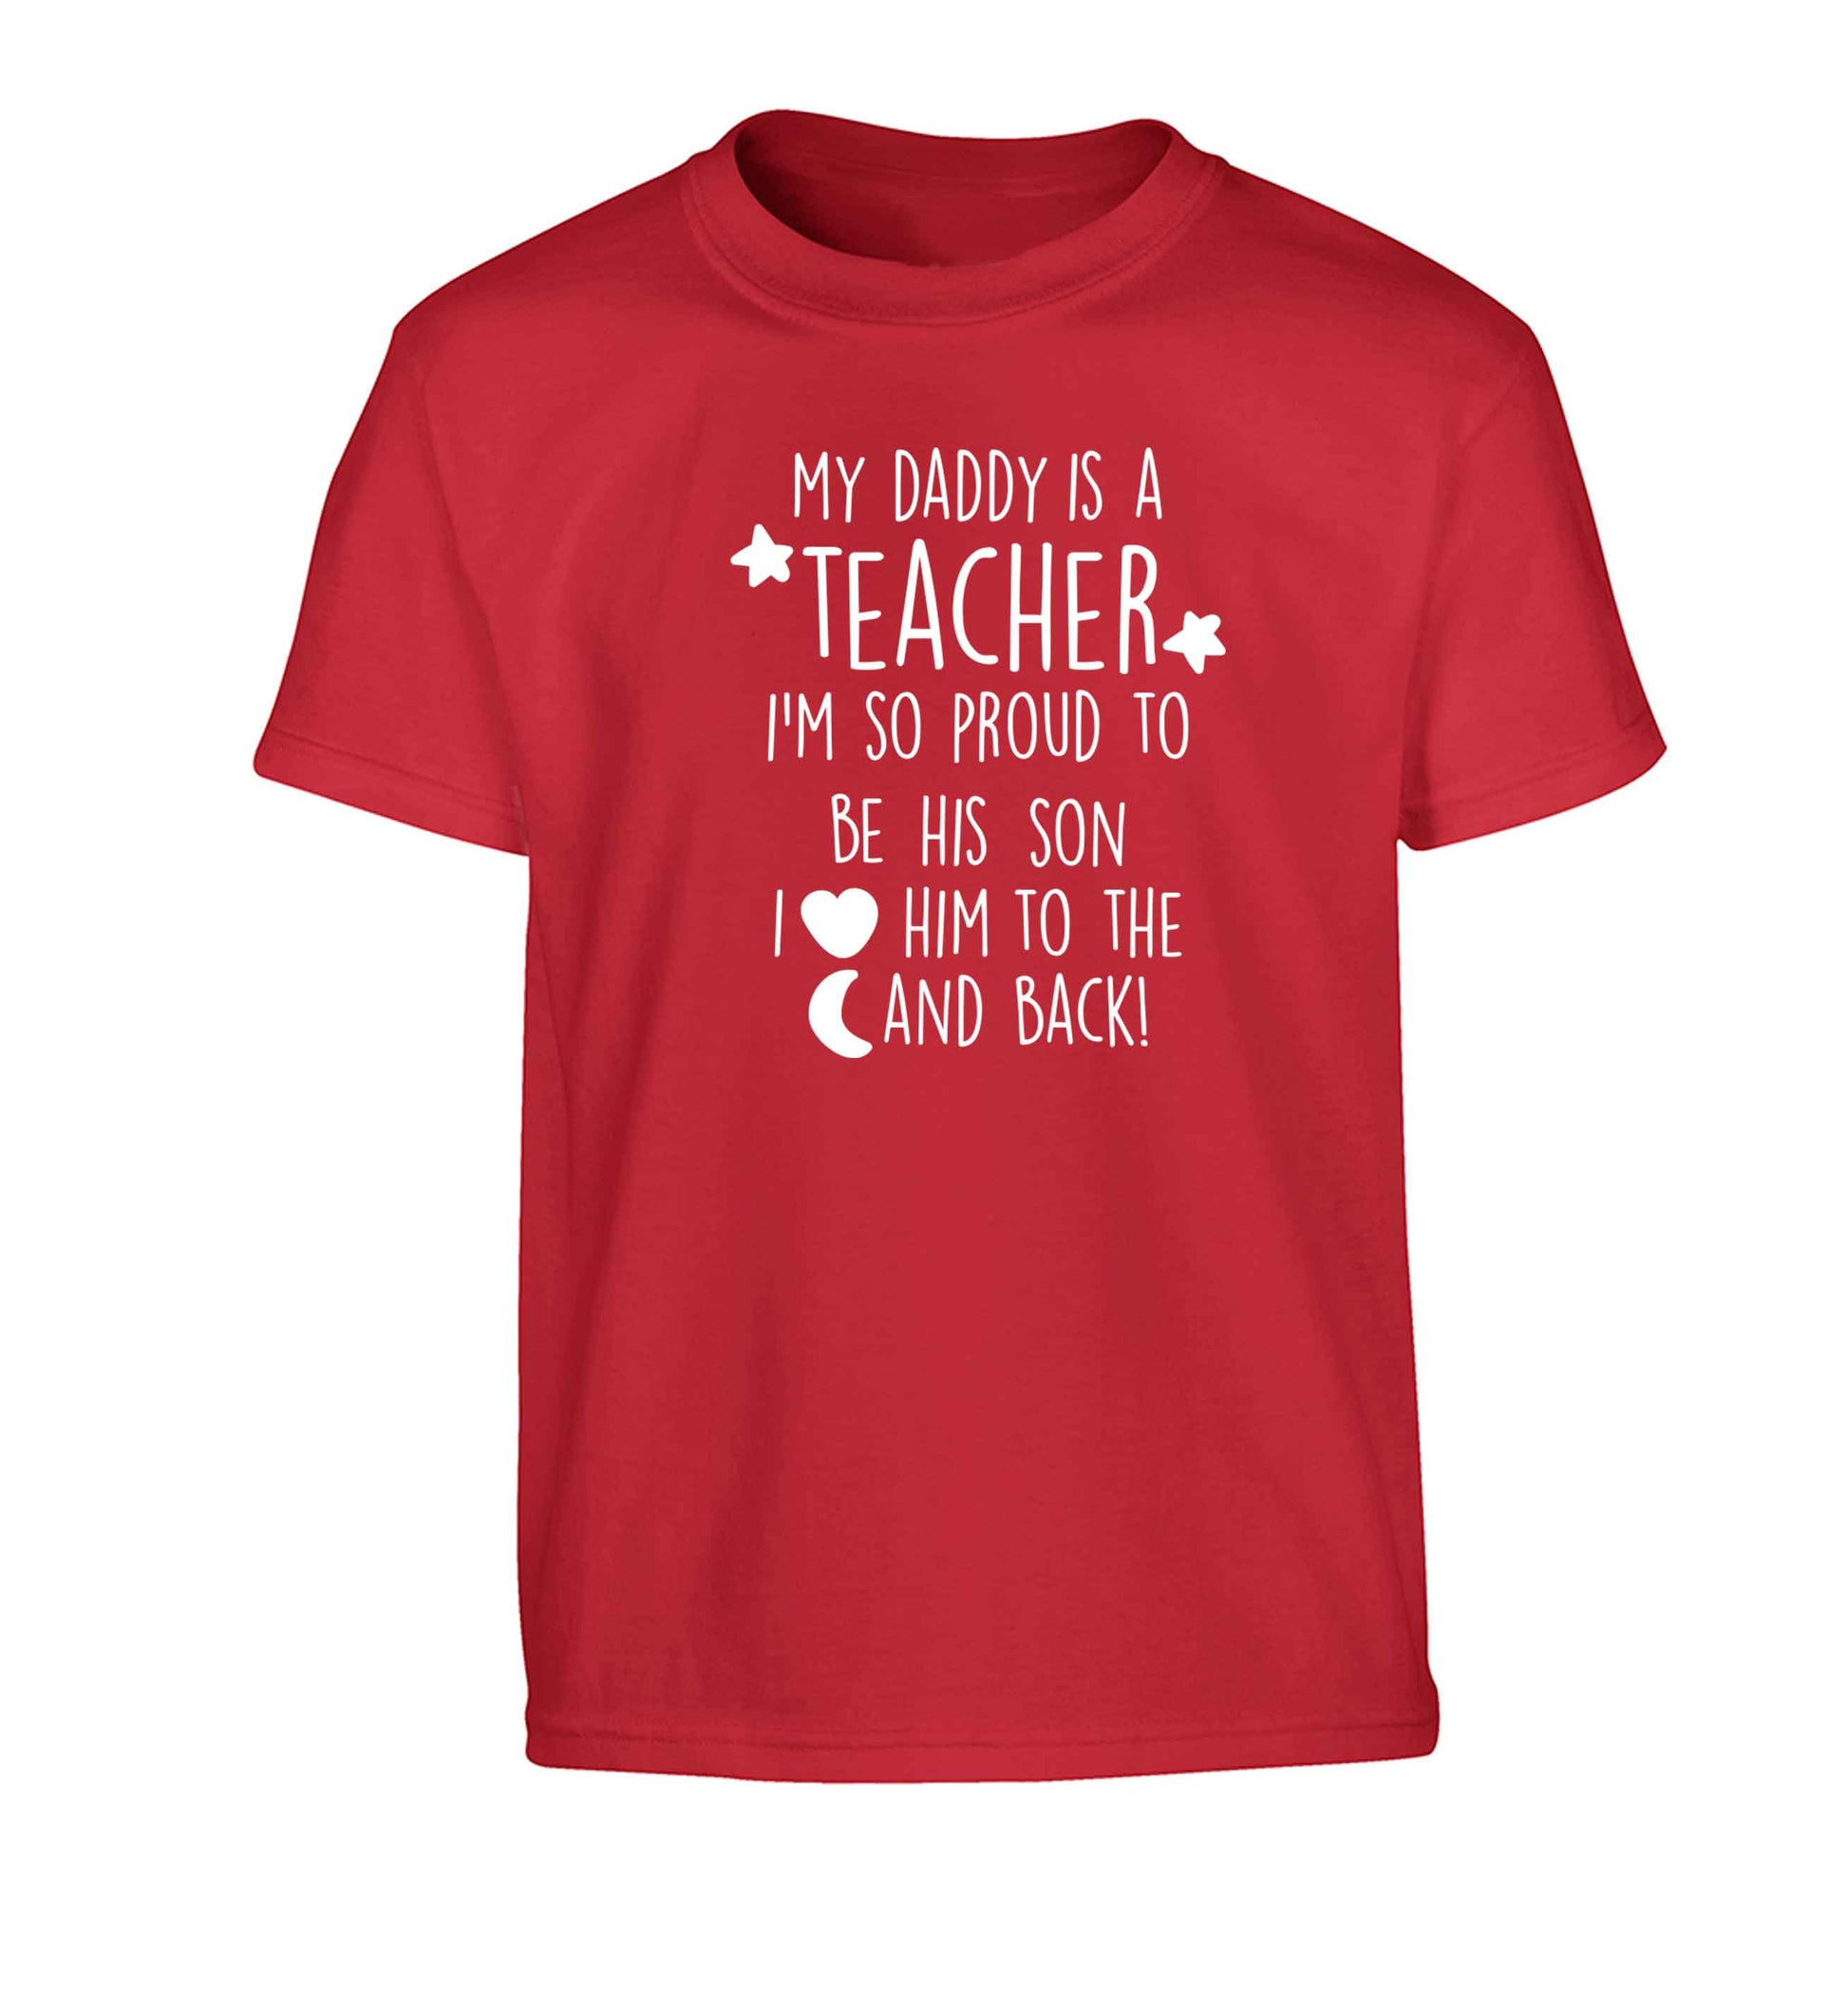 My daddy is a teacher I'm so proud to be his son I love her to the moon and back Children's red Tshirt 12-13 Years